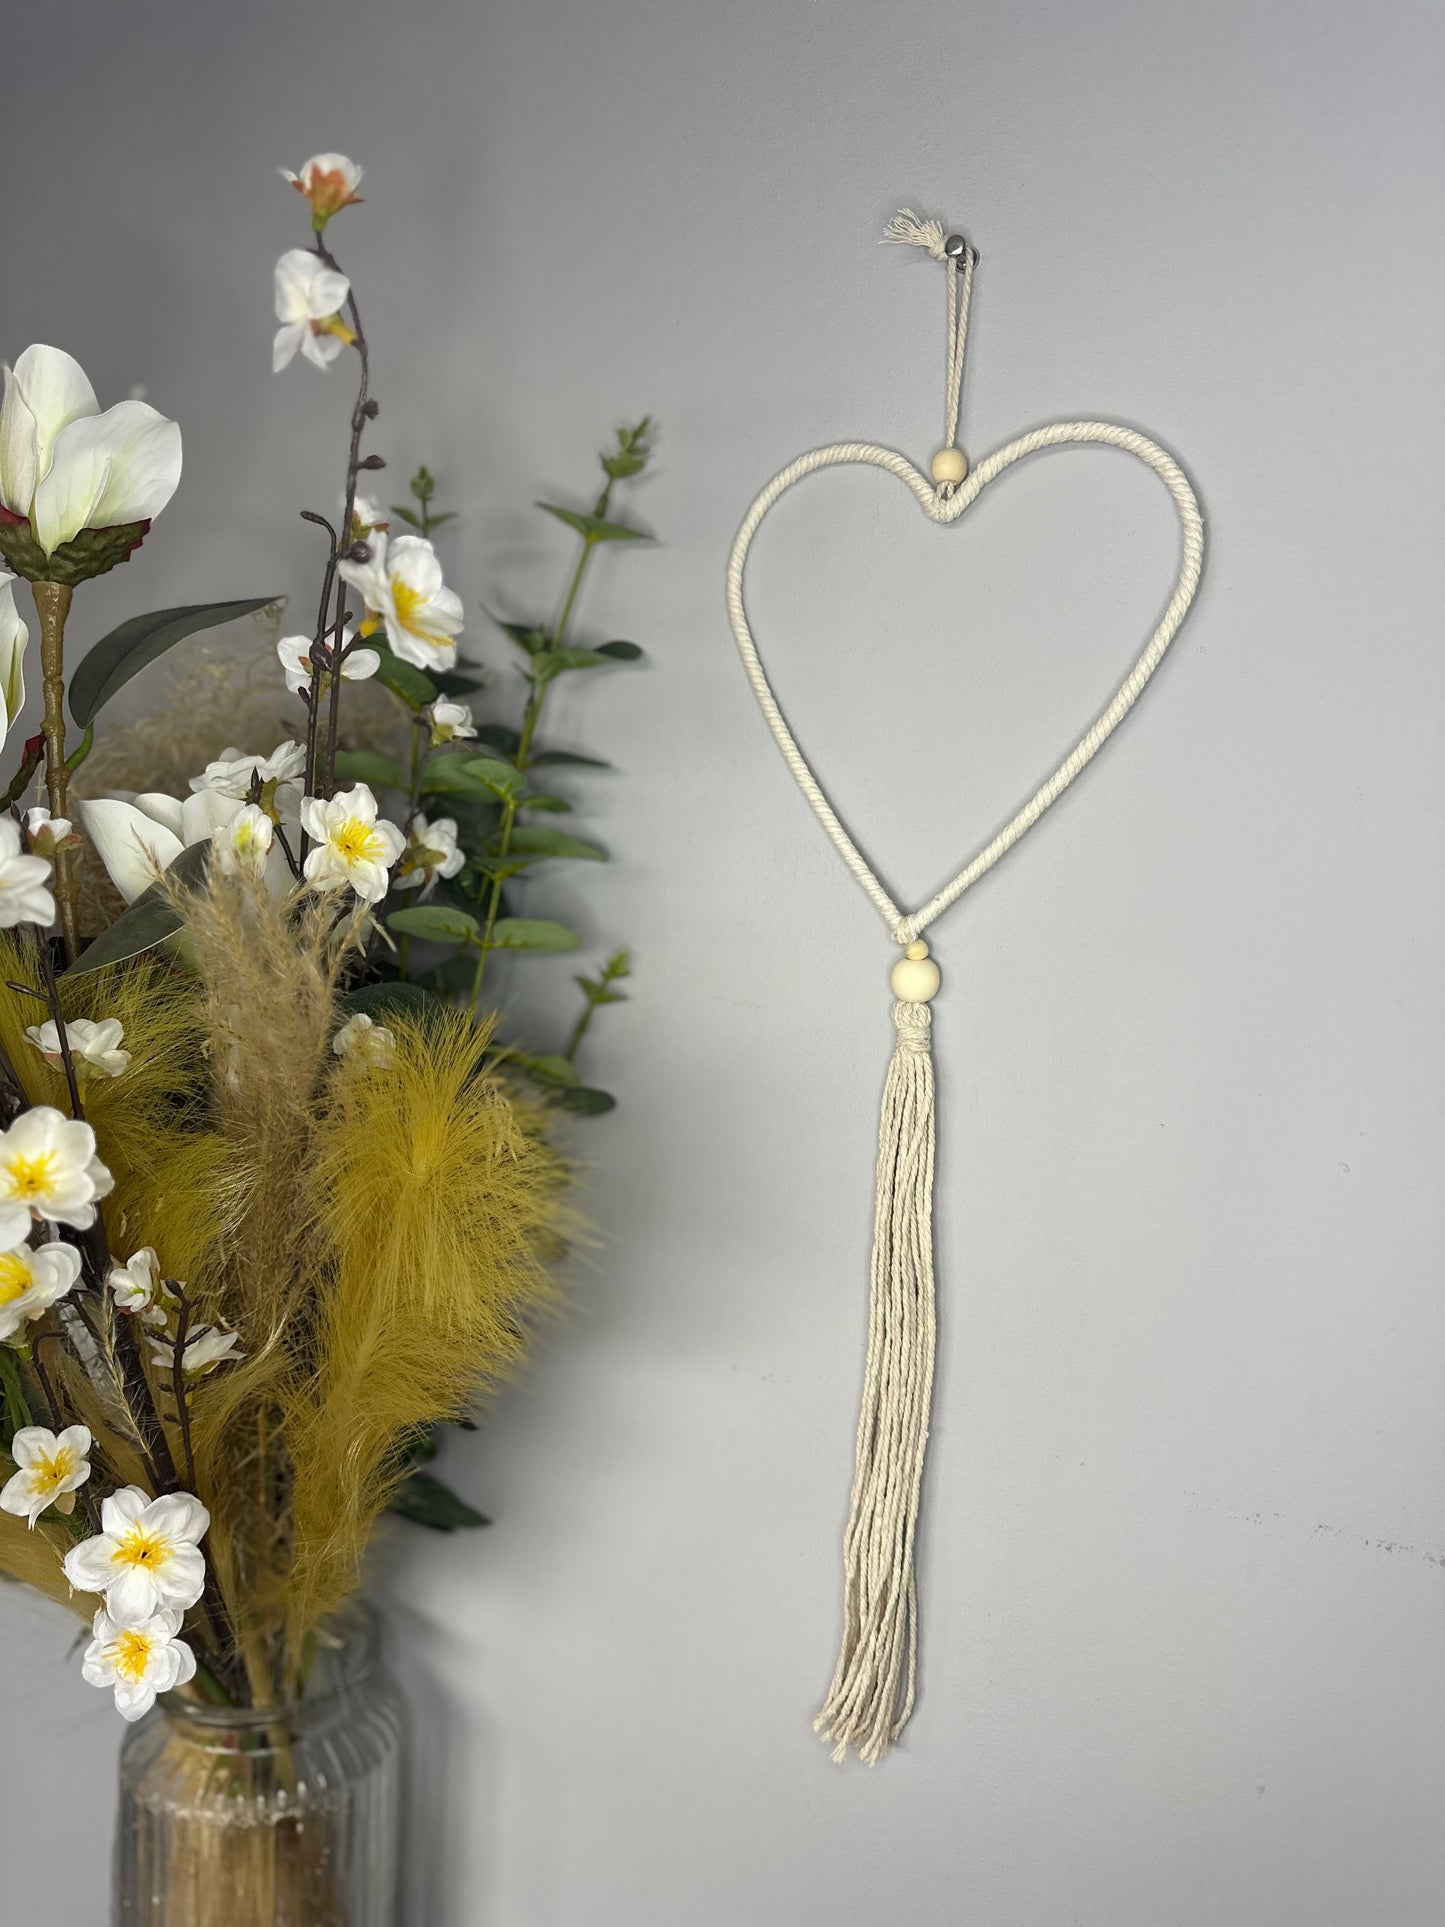 Macrame Hanging Heart For Wall Decor Cream Neutral Accessories